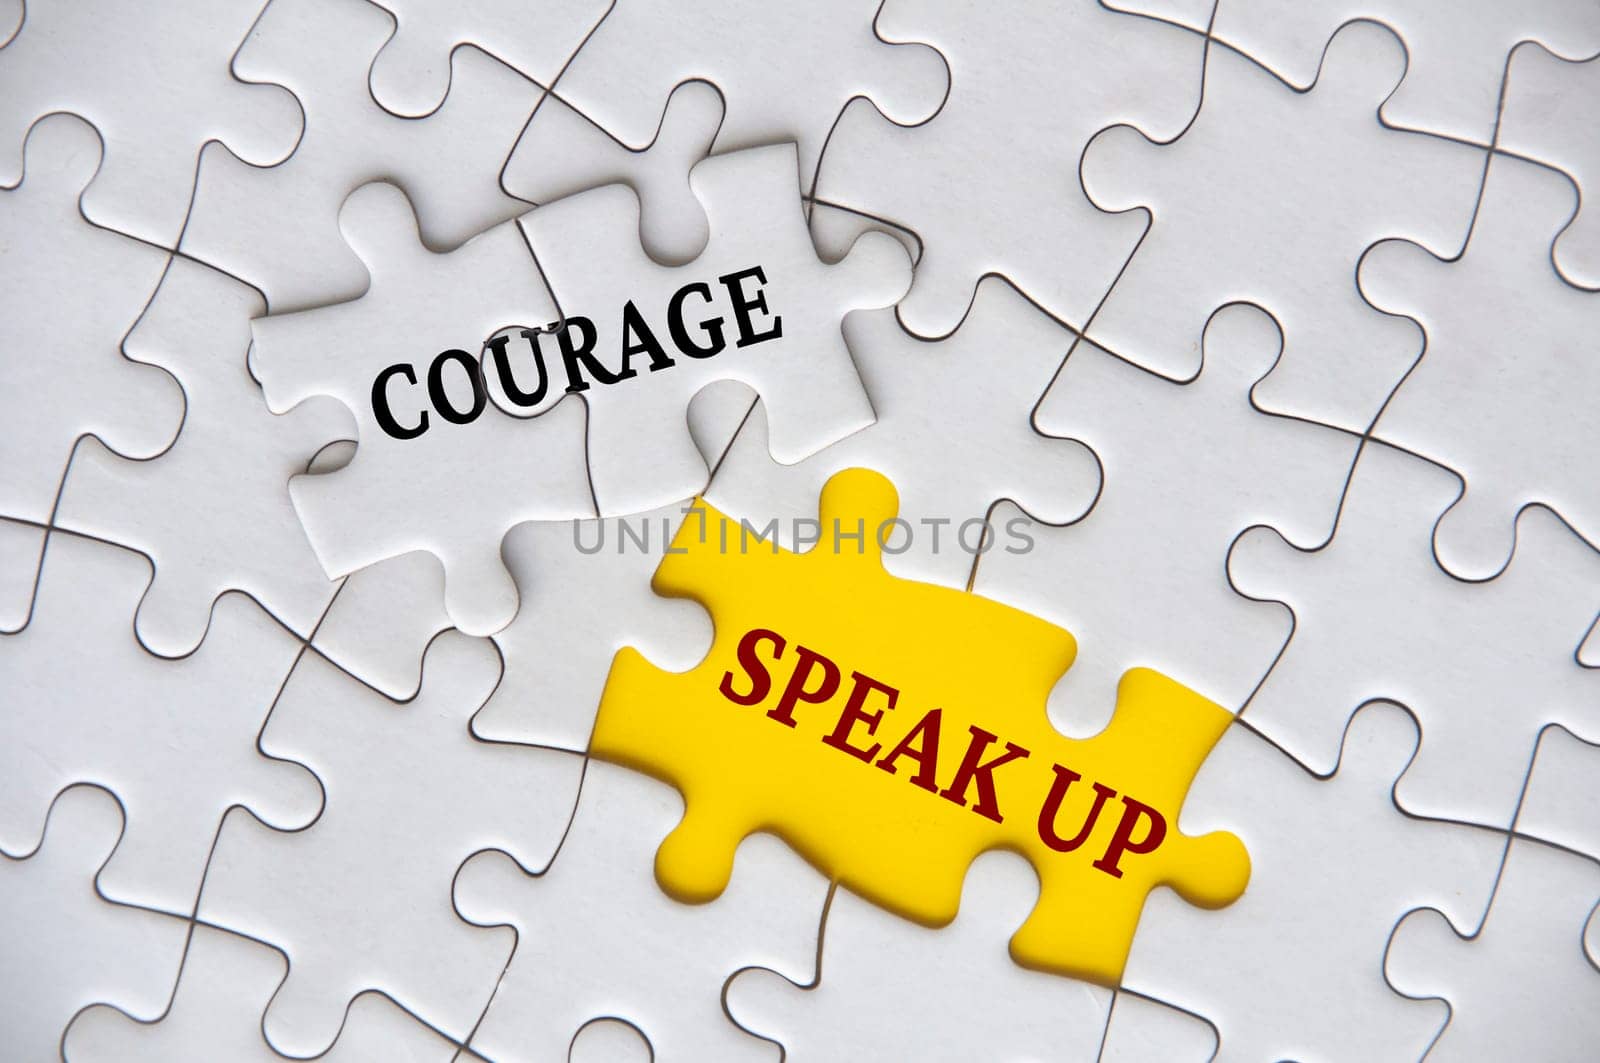 Courage to speak up text on missing jigsaw puzzle representing business culture in exercising speak up